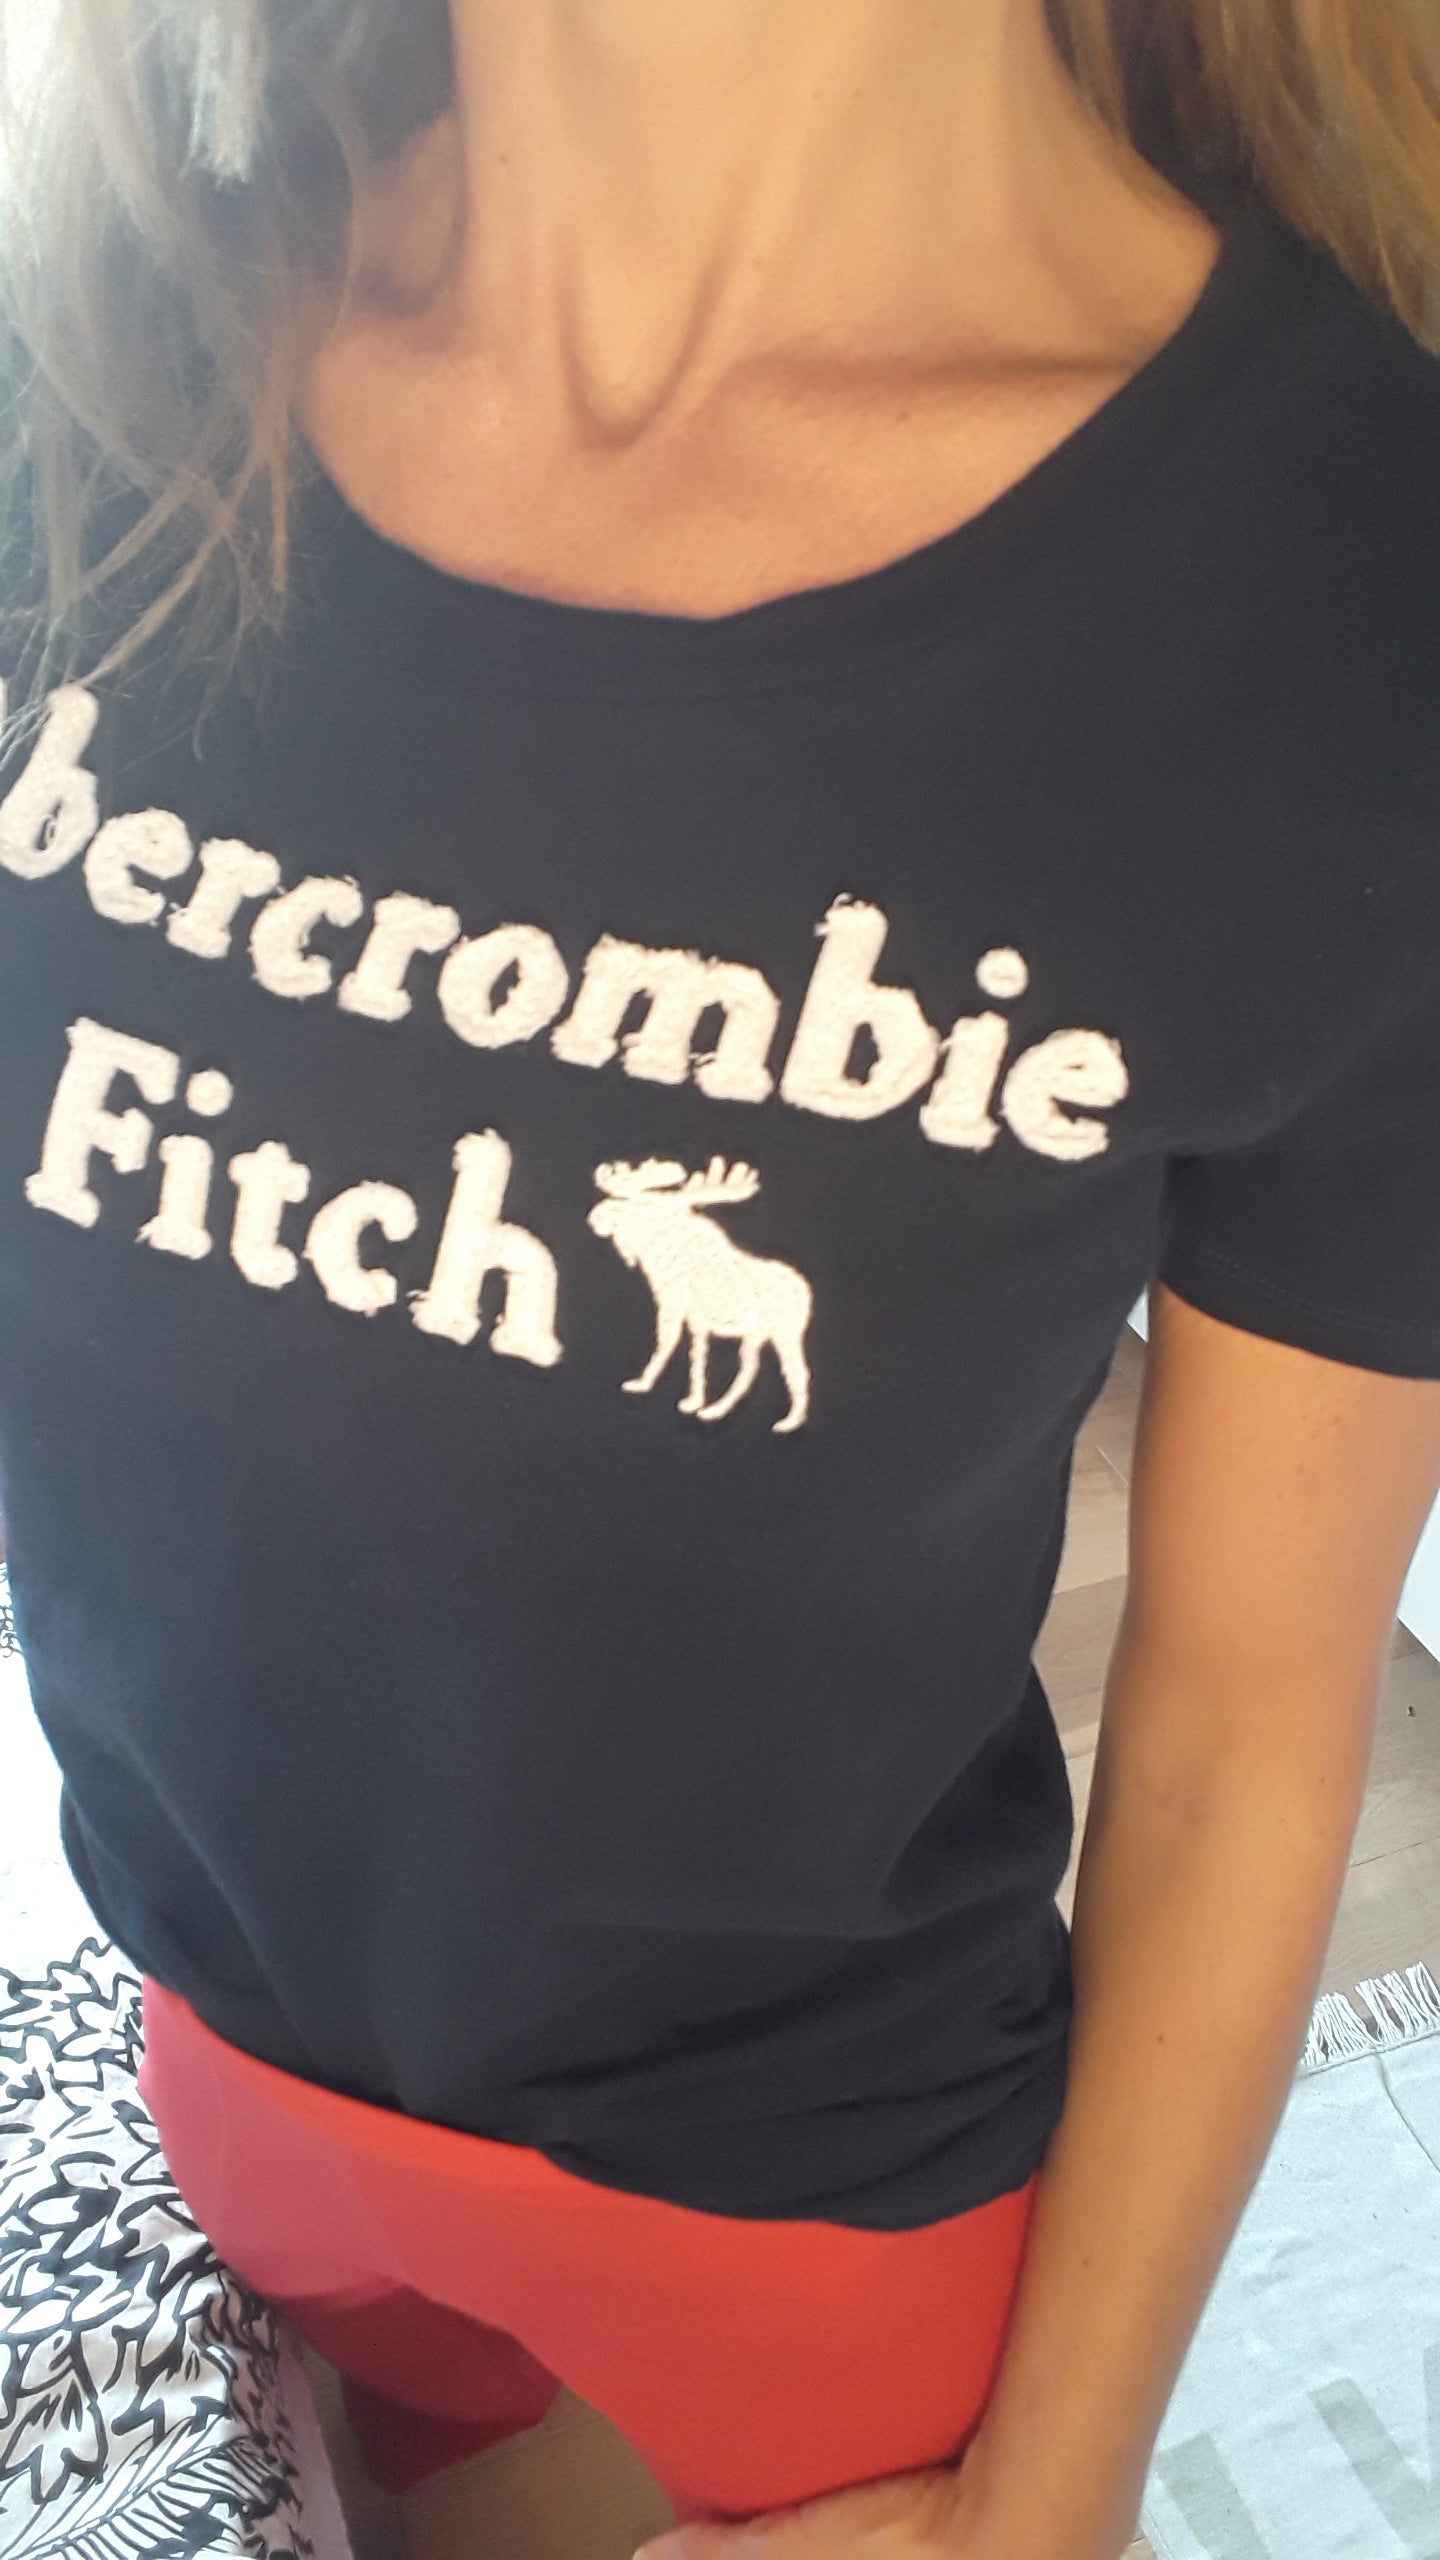 T-shirt marine - Abercrombie & Fitch - 36